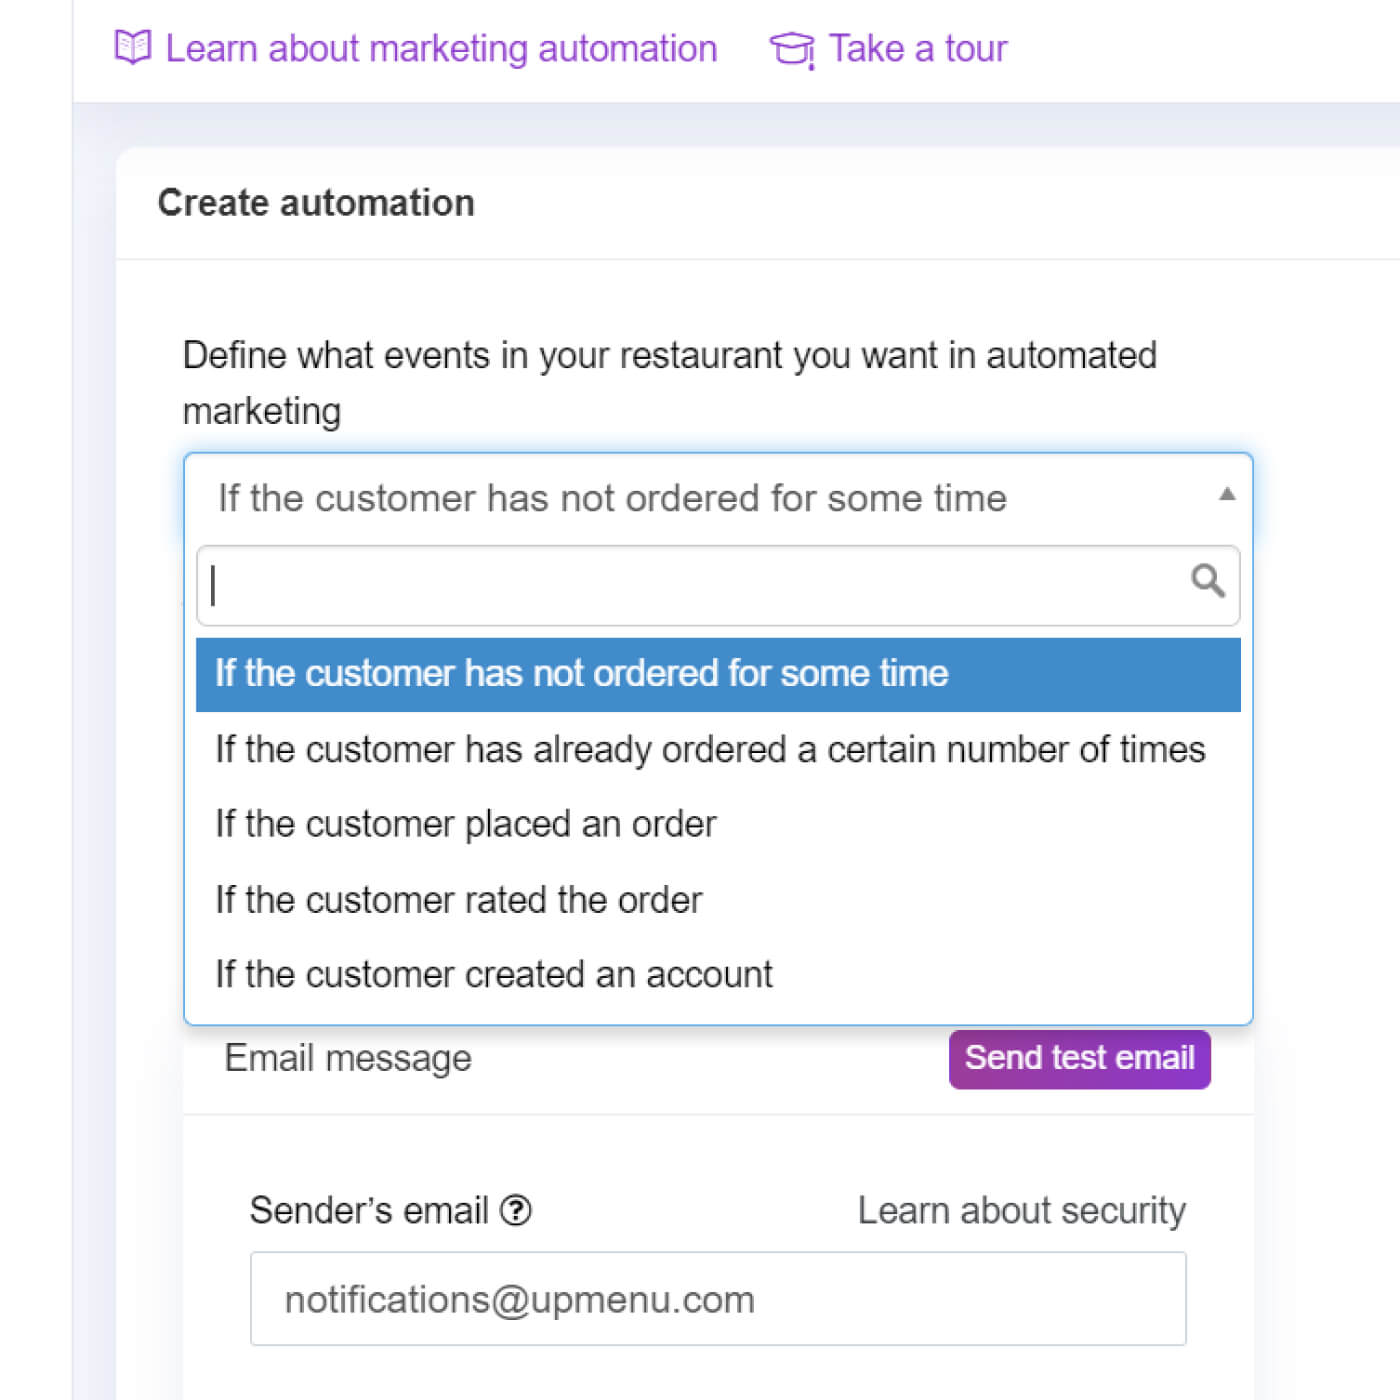 Restaurant email marketing - Step 1: Choosing campaign audience